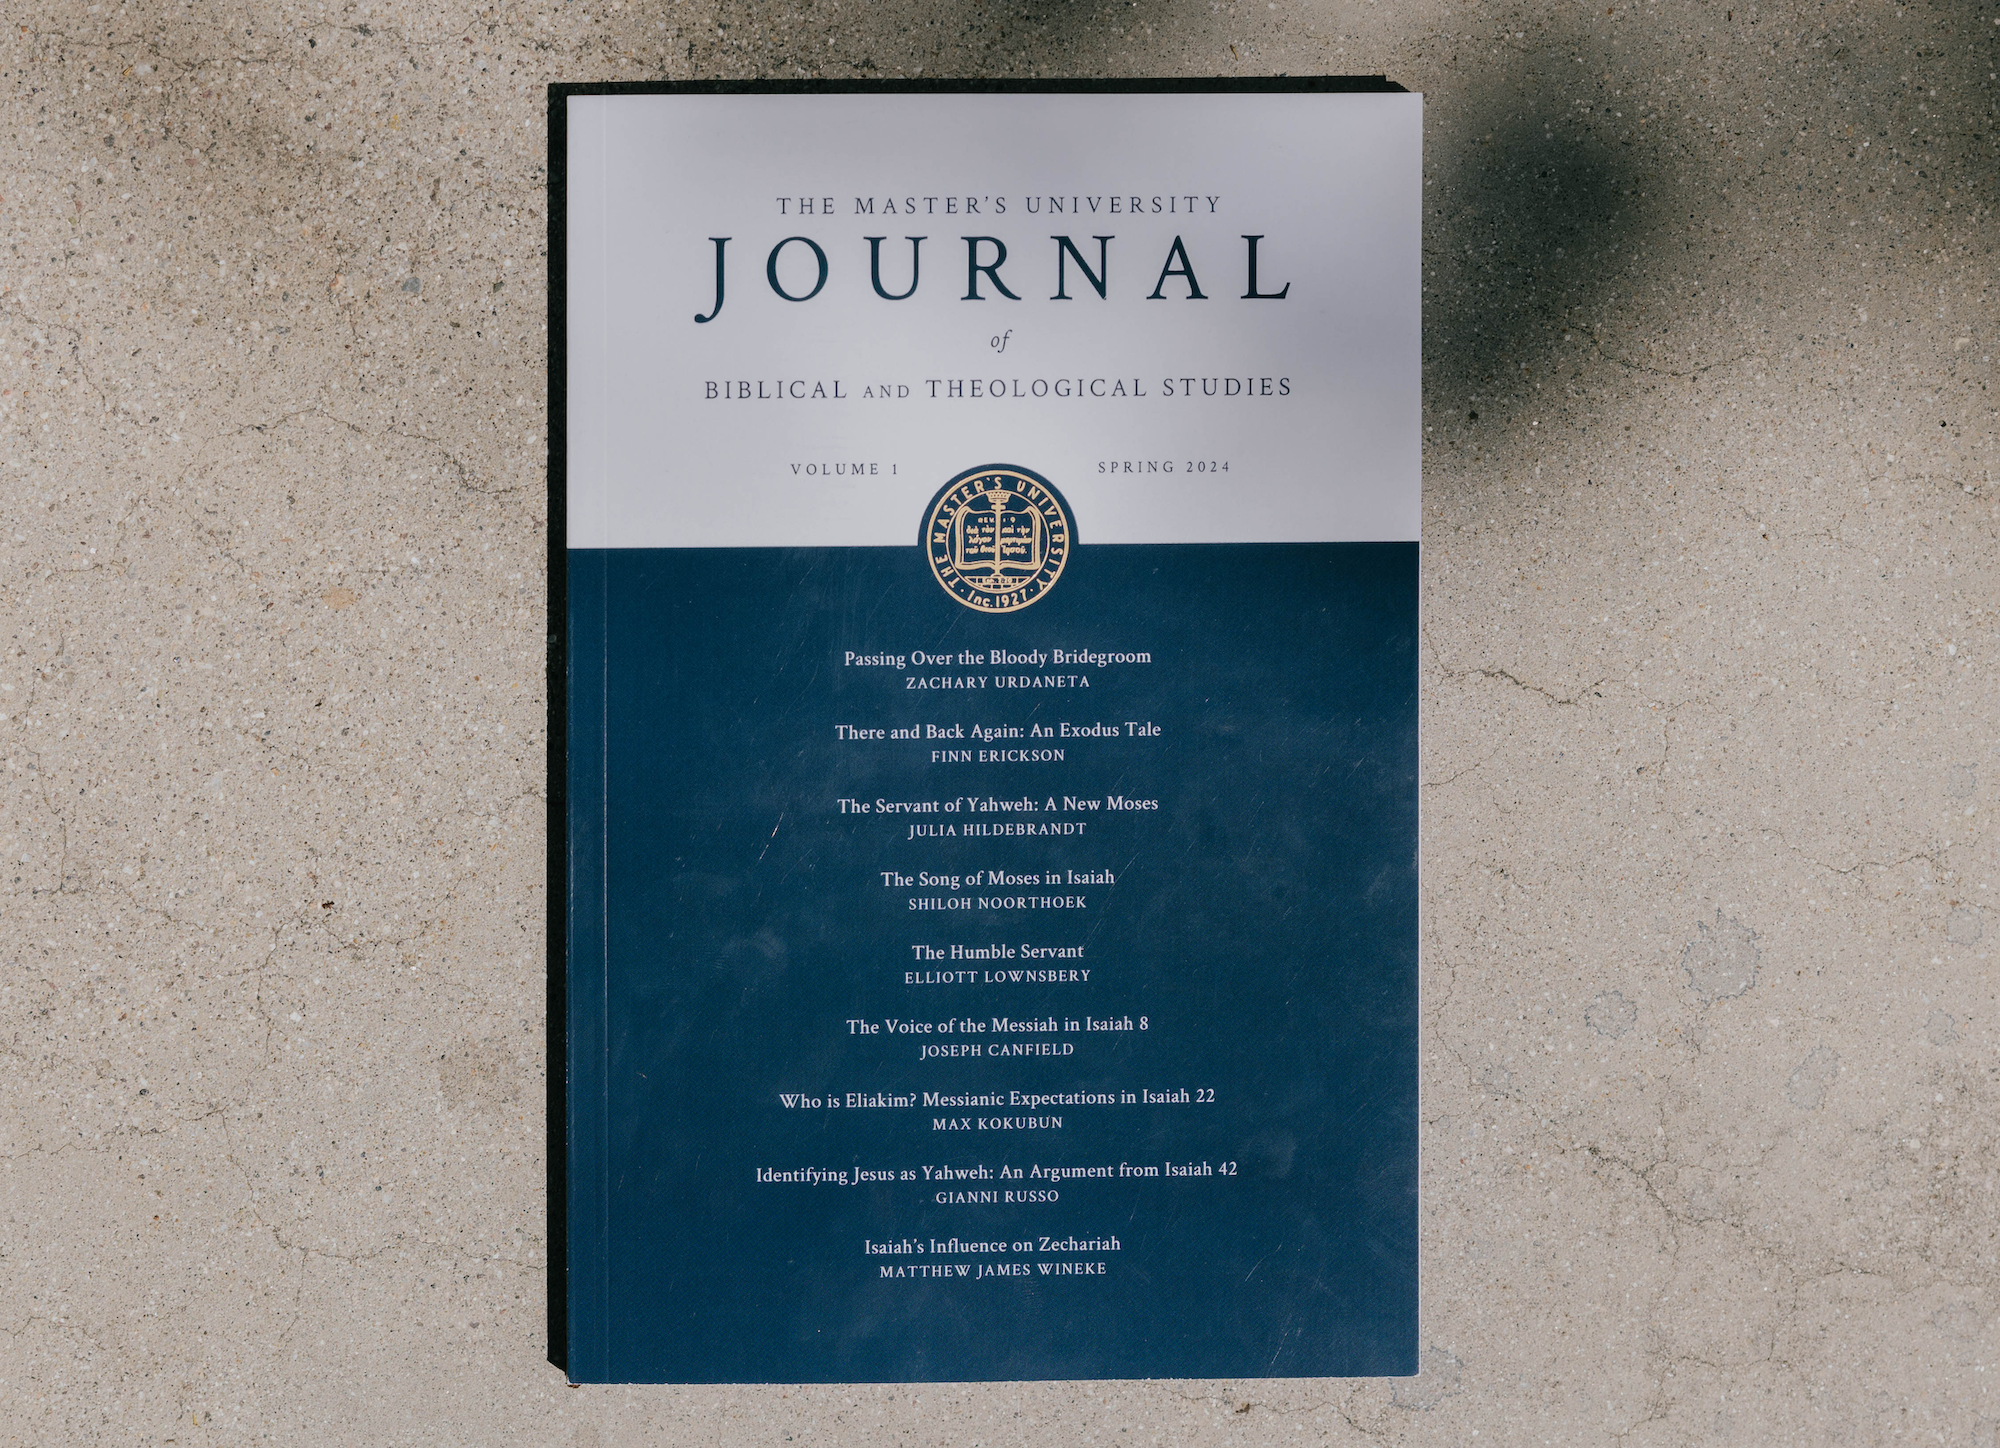 TMU Publishes First-Ever Student Academic Journal